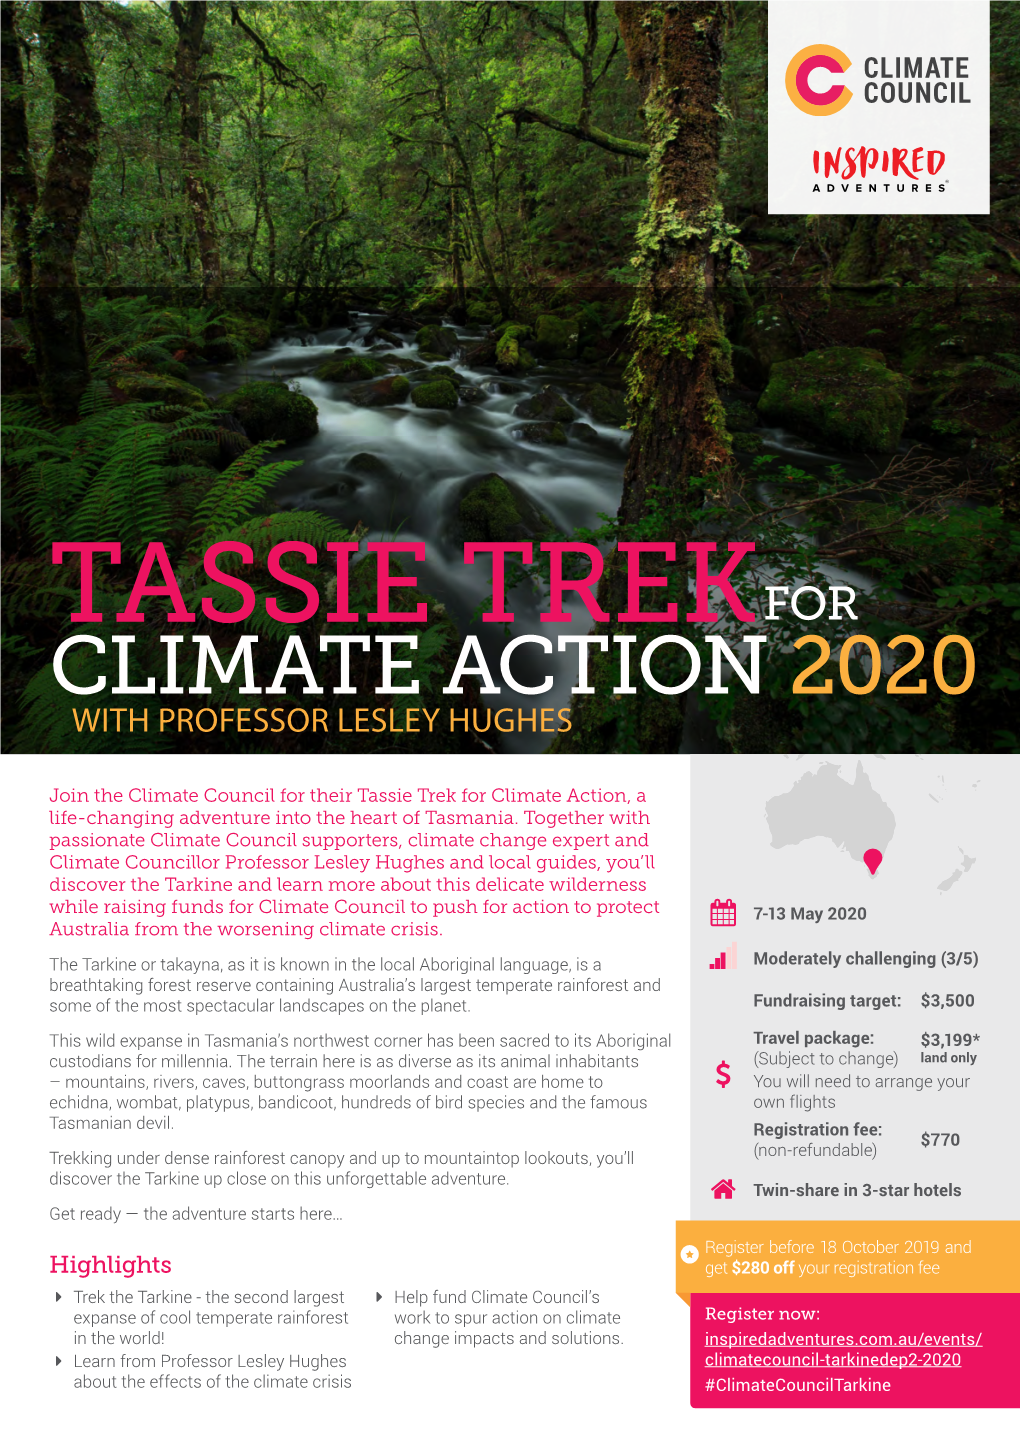 Tassie Trek for Climate Action 2020 with Professor Lesley Hughes